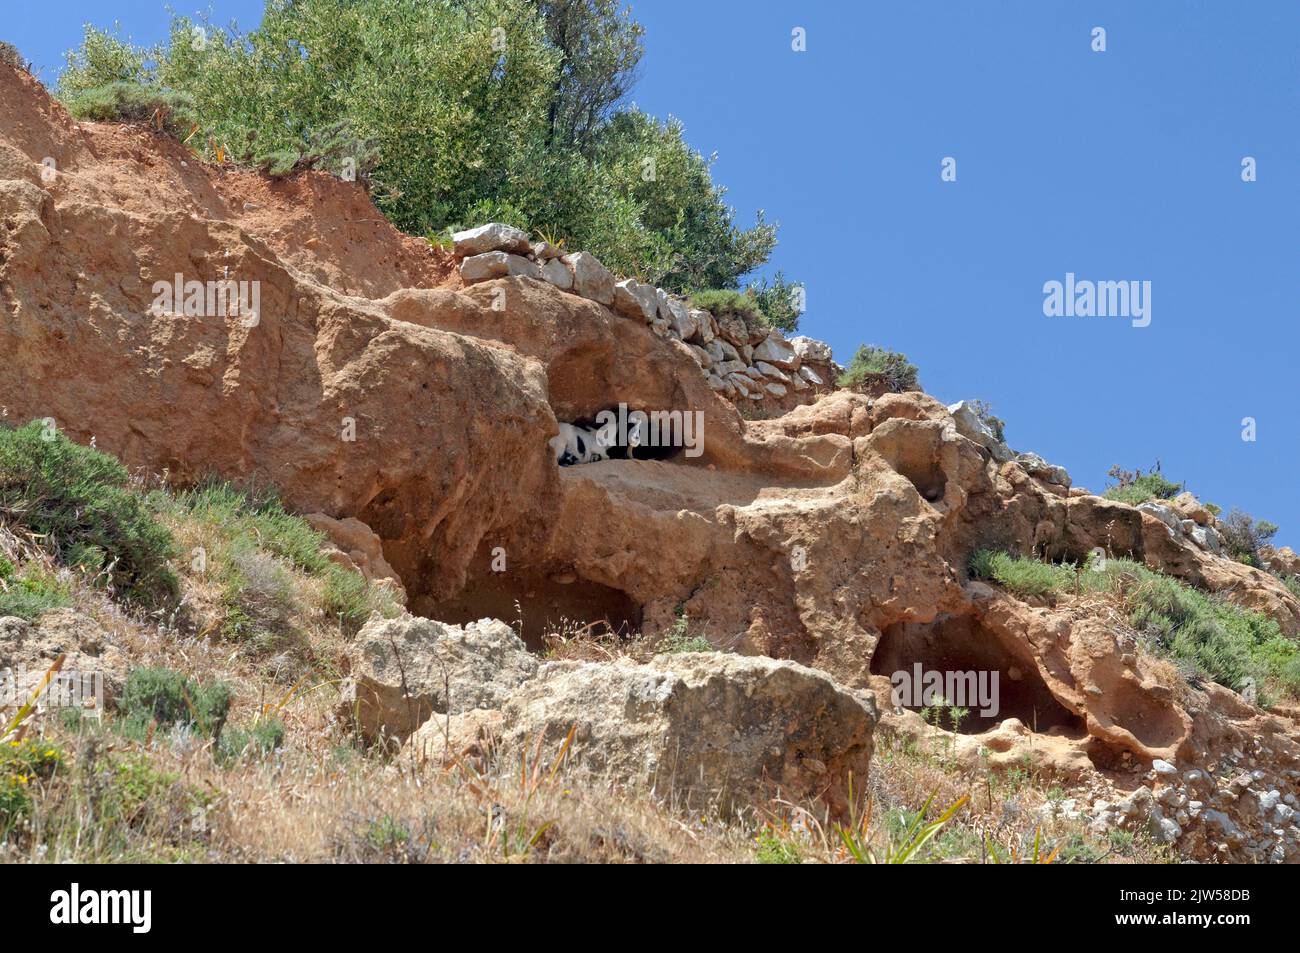 Goat shelters from the hot sun  in handy cave, Tilos island, Dodecanese, Greece, EU Stock Photo